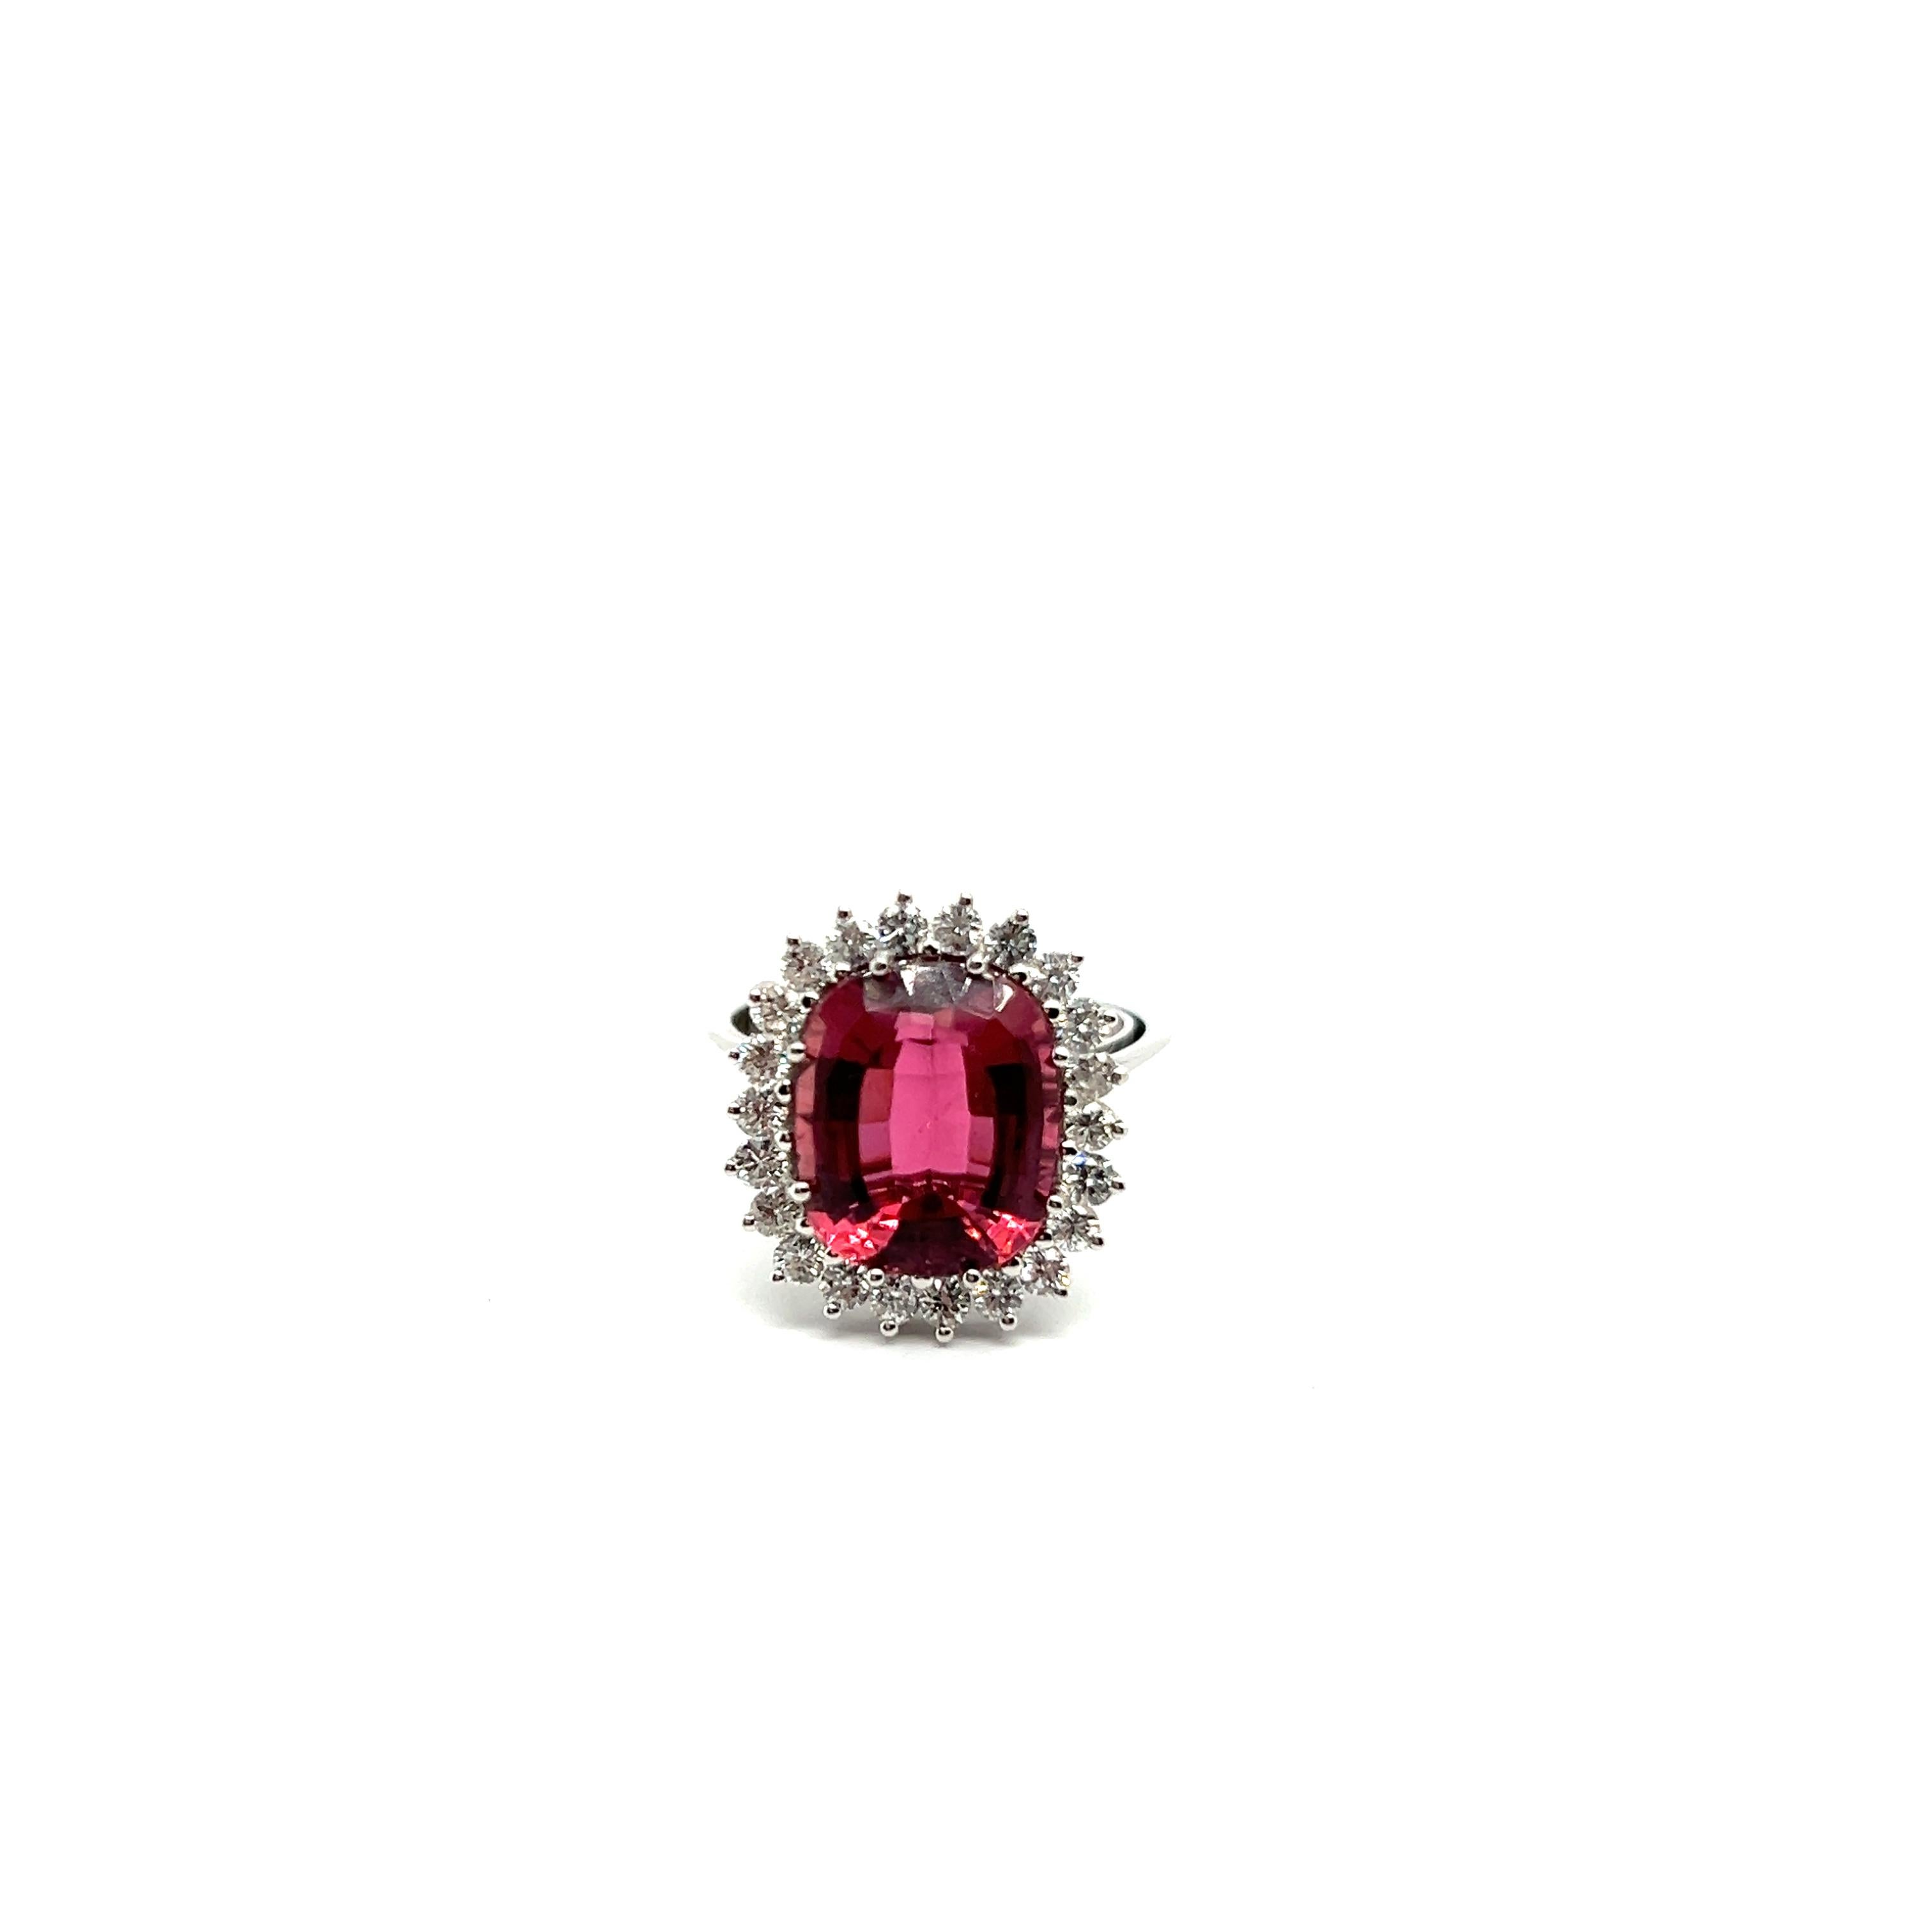  Cocktail Ring with Pink Tourmaline & Diamond in 18 Karat White Gold For Sale 6